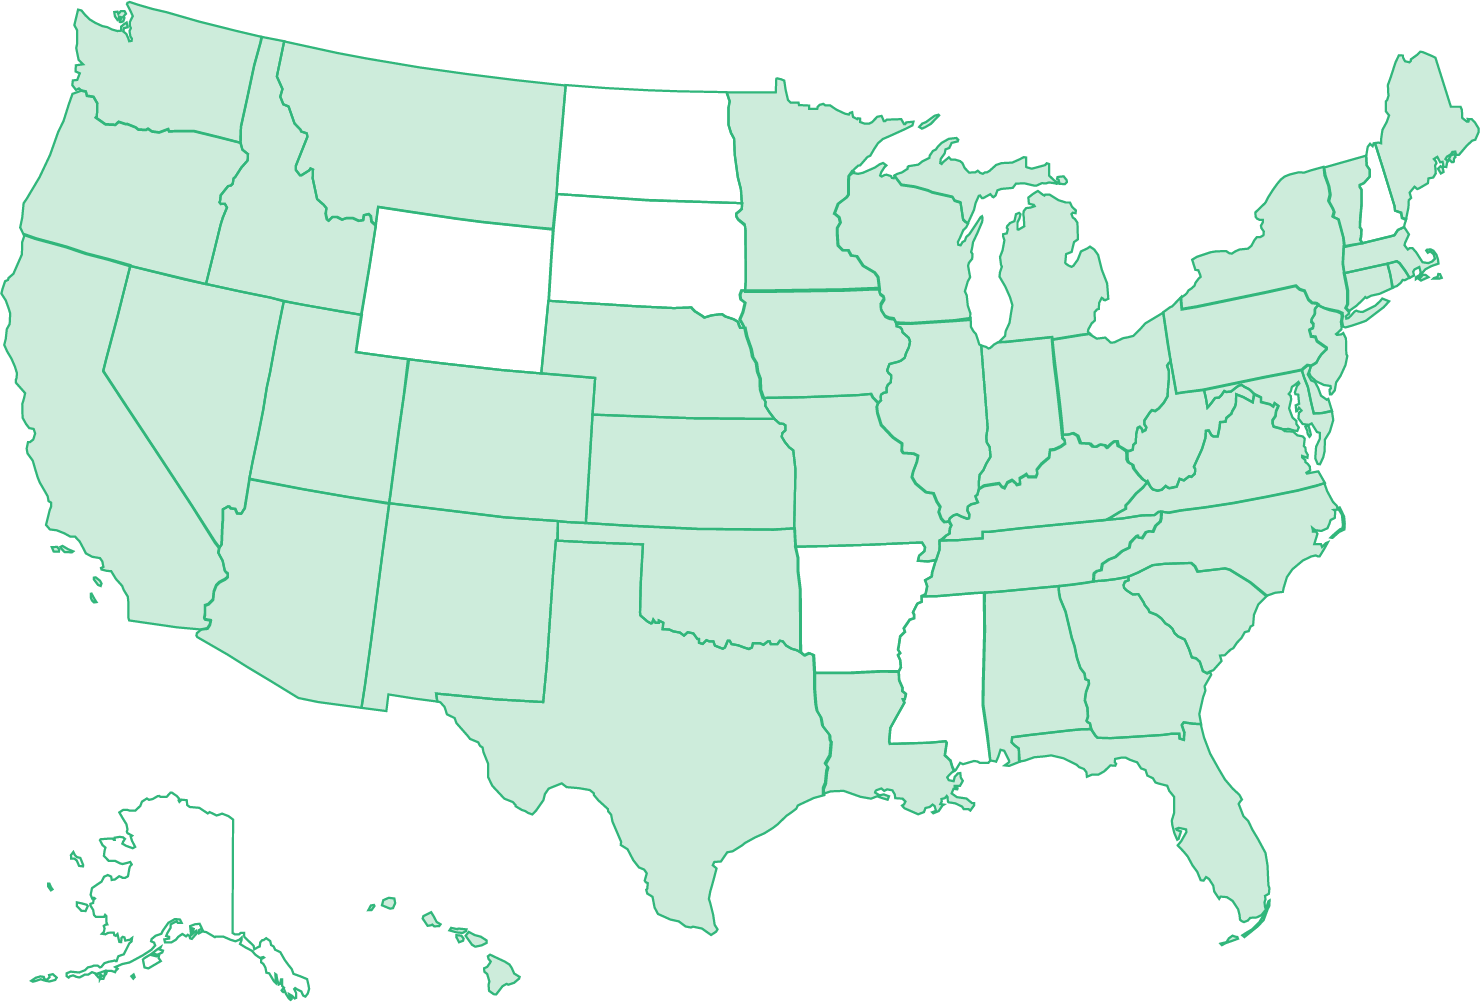 A map of the United States of America showing all the places where Ad Hoc employees live and work.